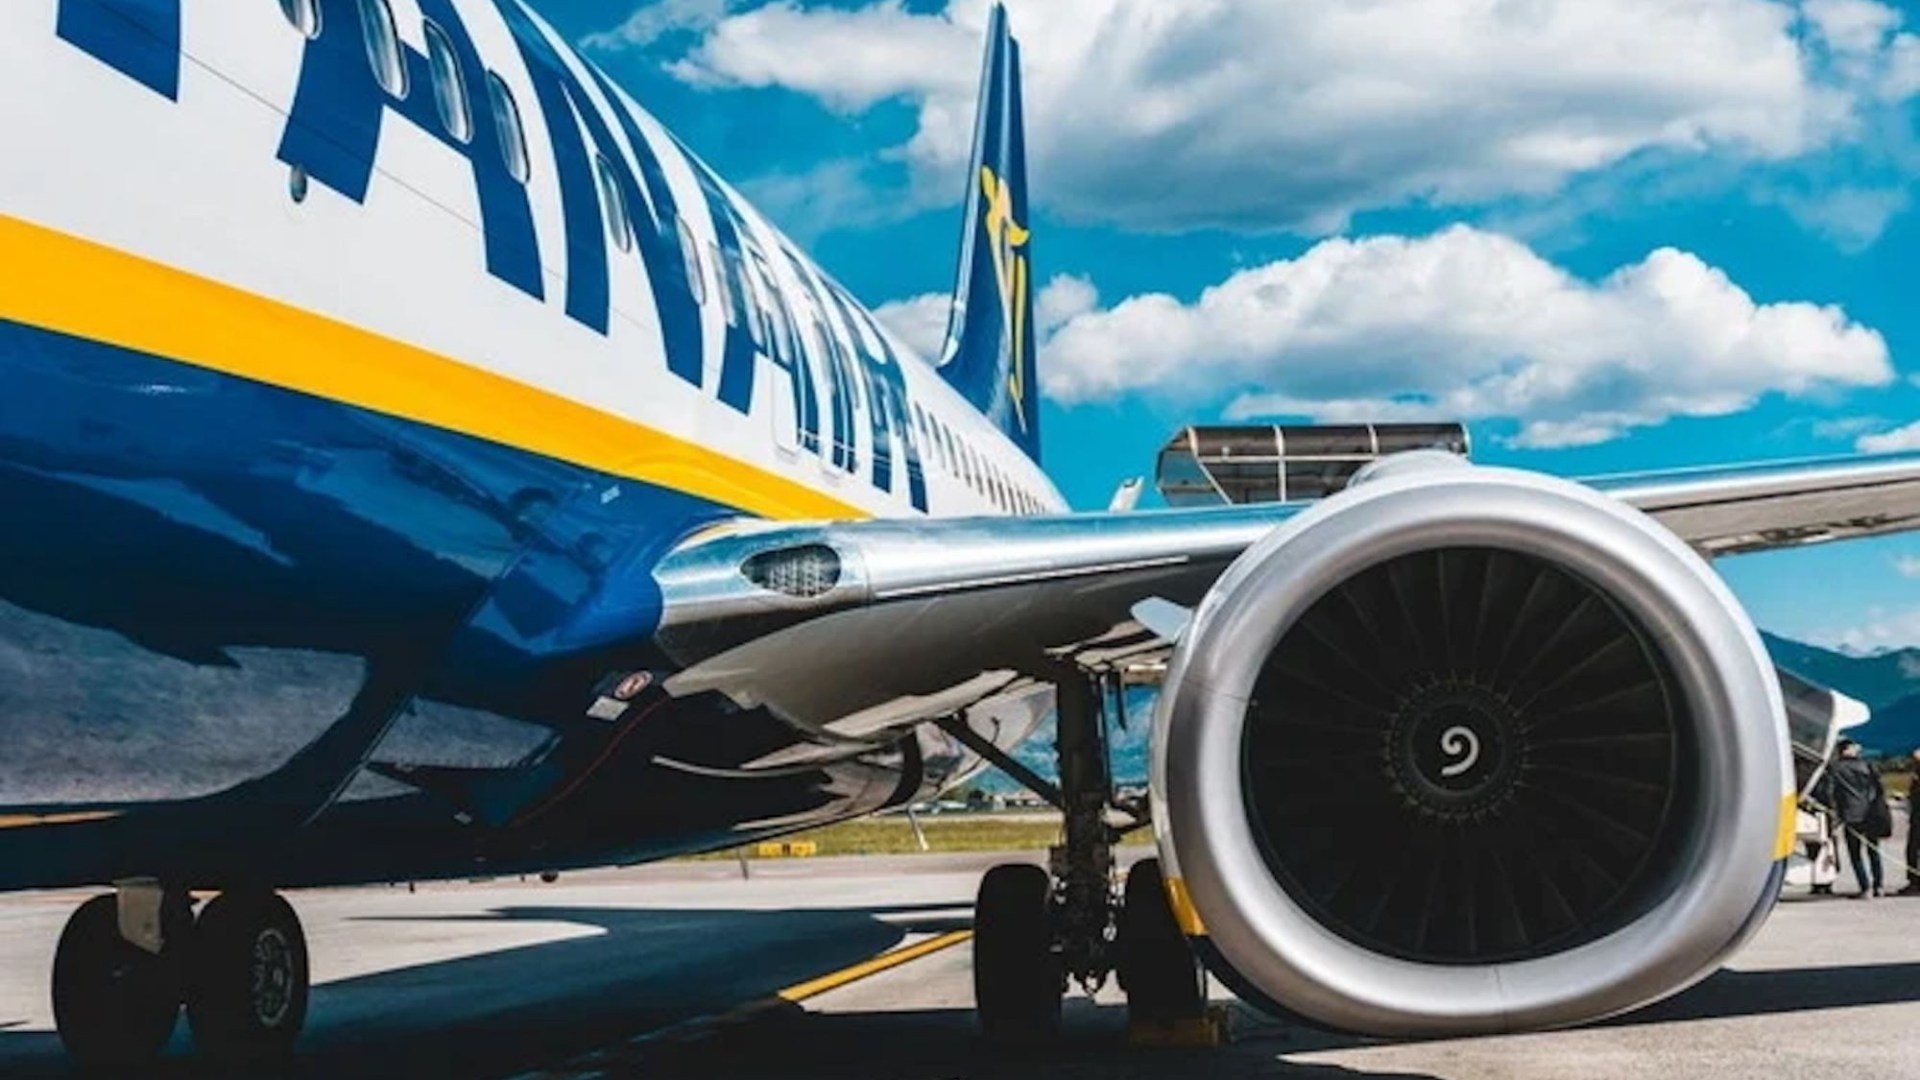 Unlock Your Wanderlust: Ryanair’s £14.99 Flights to 6 New Holiday Destinations from UK Airport!